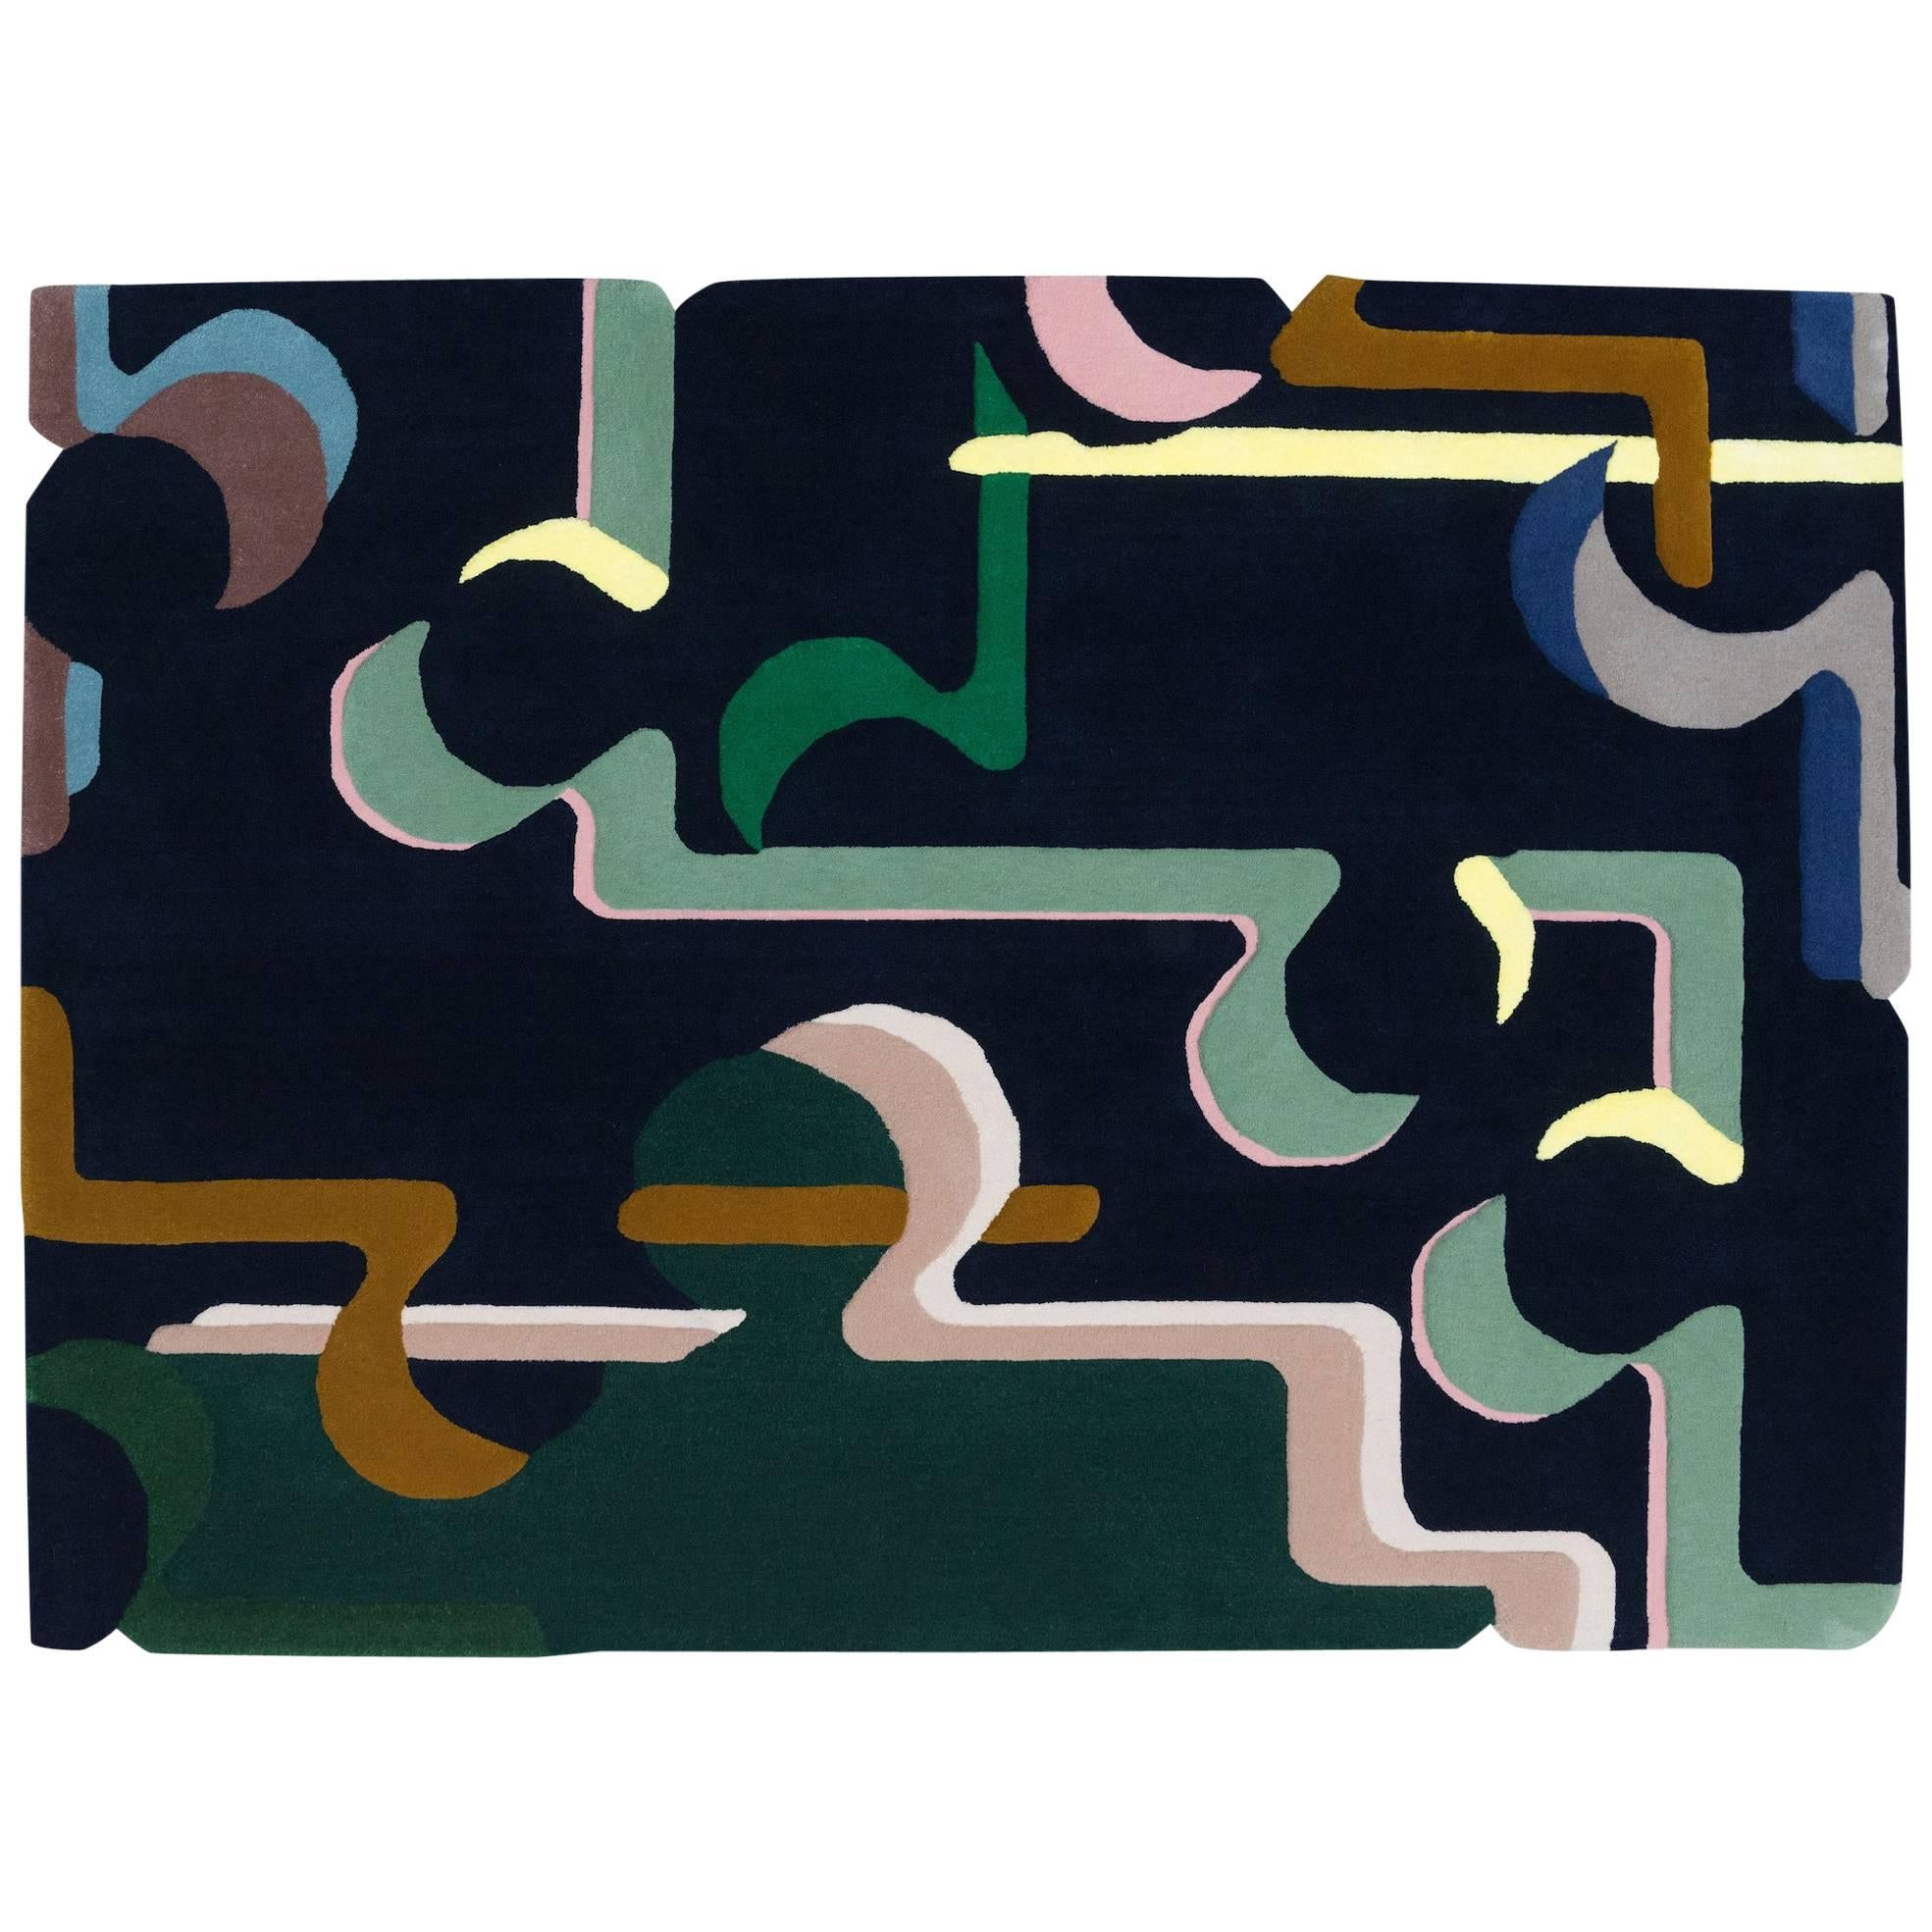 'Element' Hand-Tufted Area Rug by Elsa Poux & Pinton For Sale